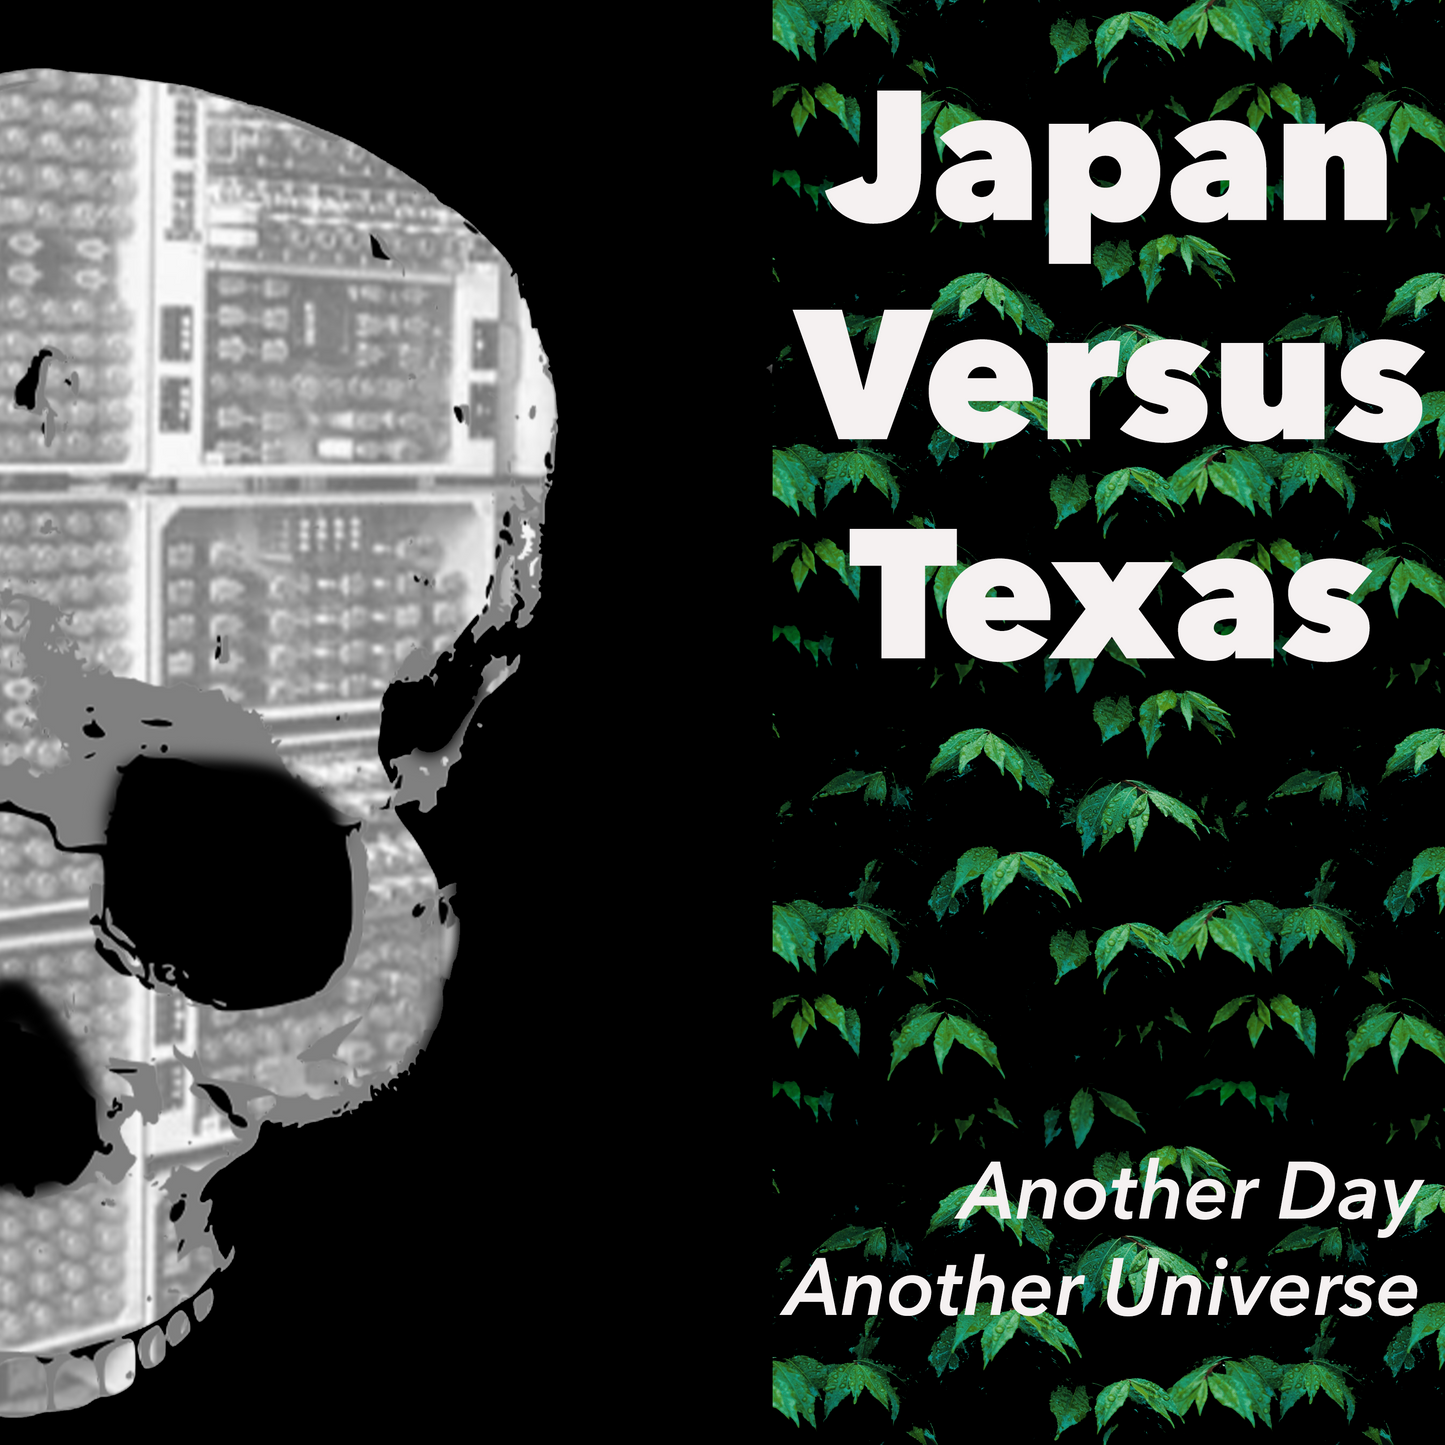 Another Day, Another Universe by Japan Versus Texas high-quality .mp3 single